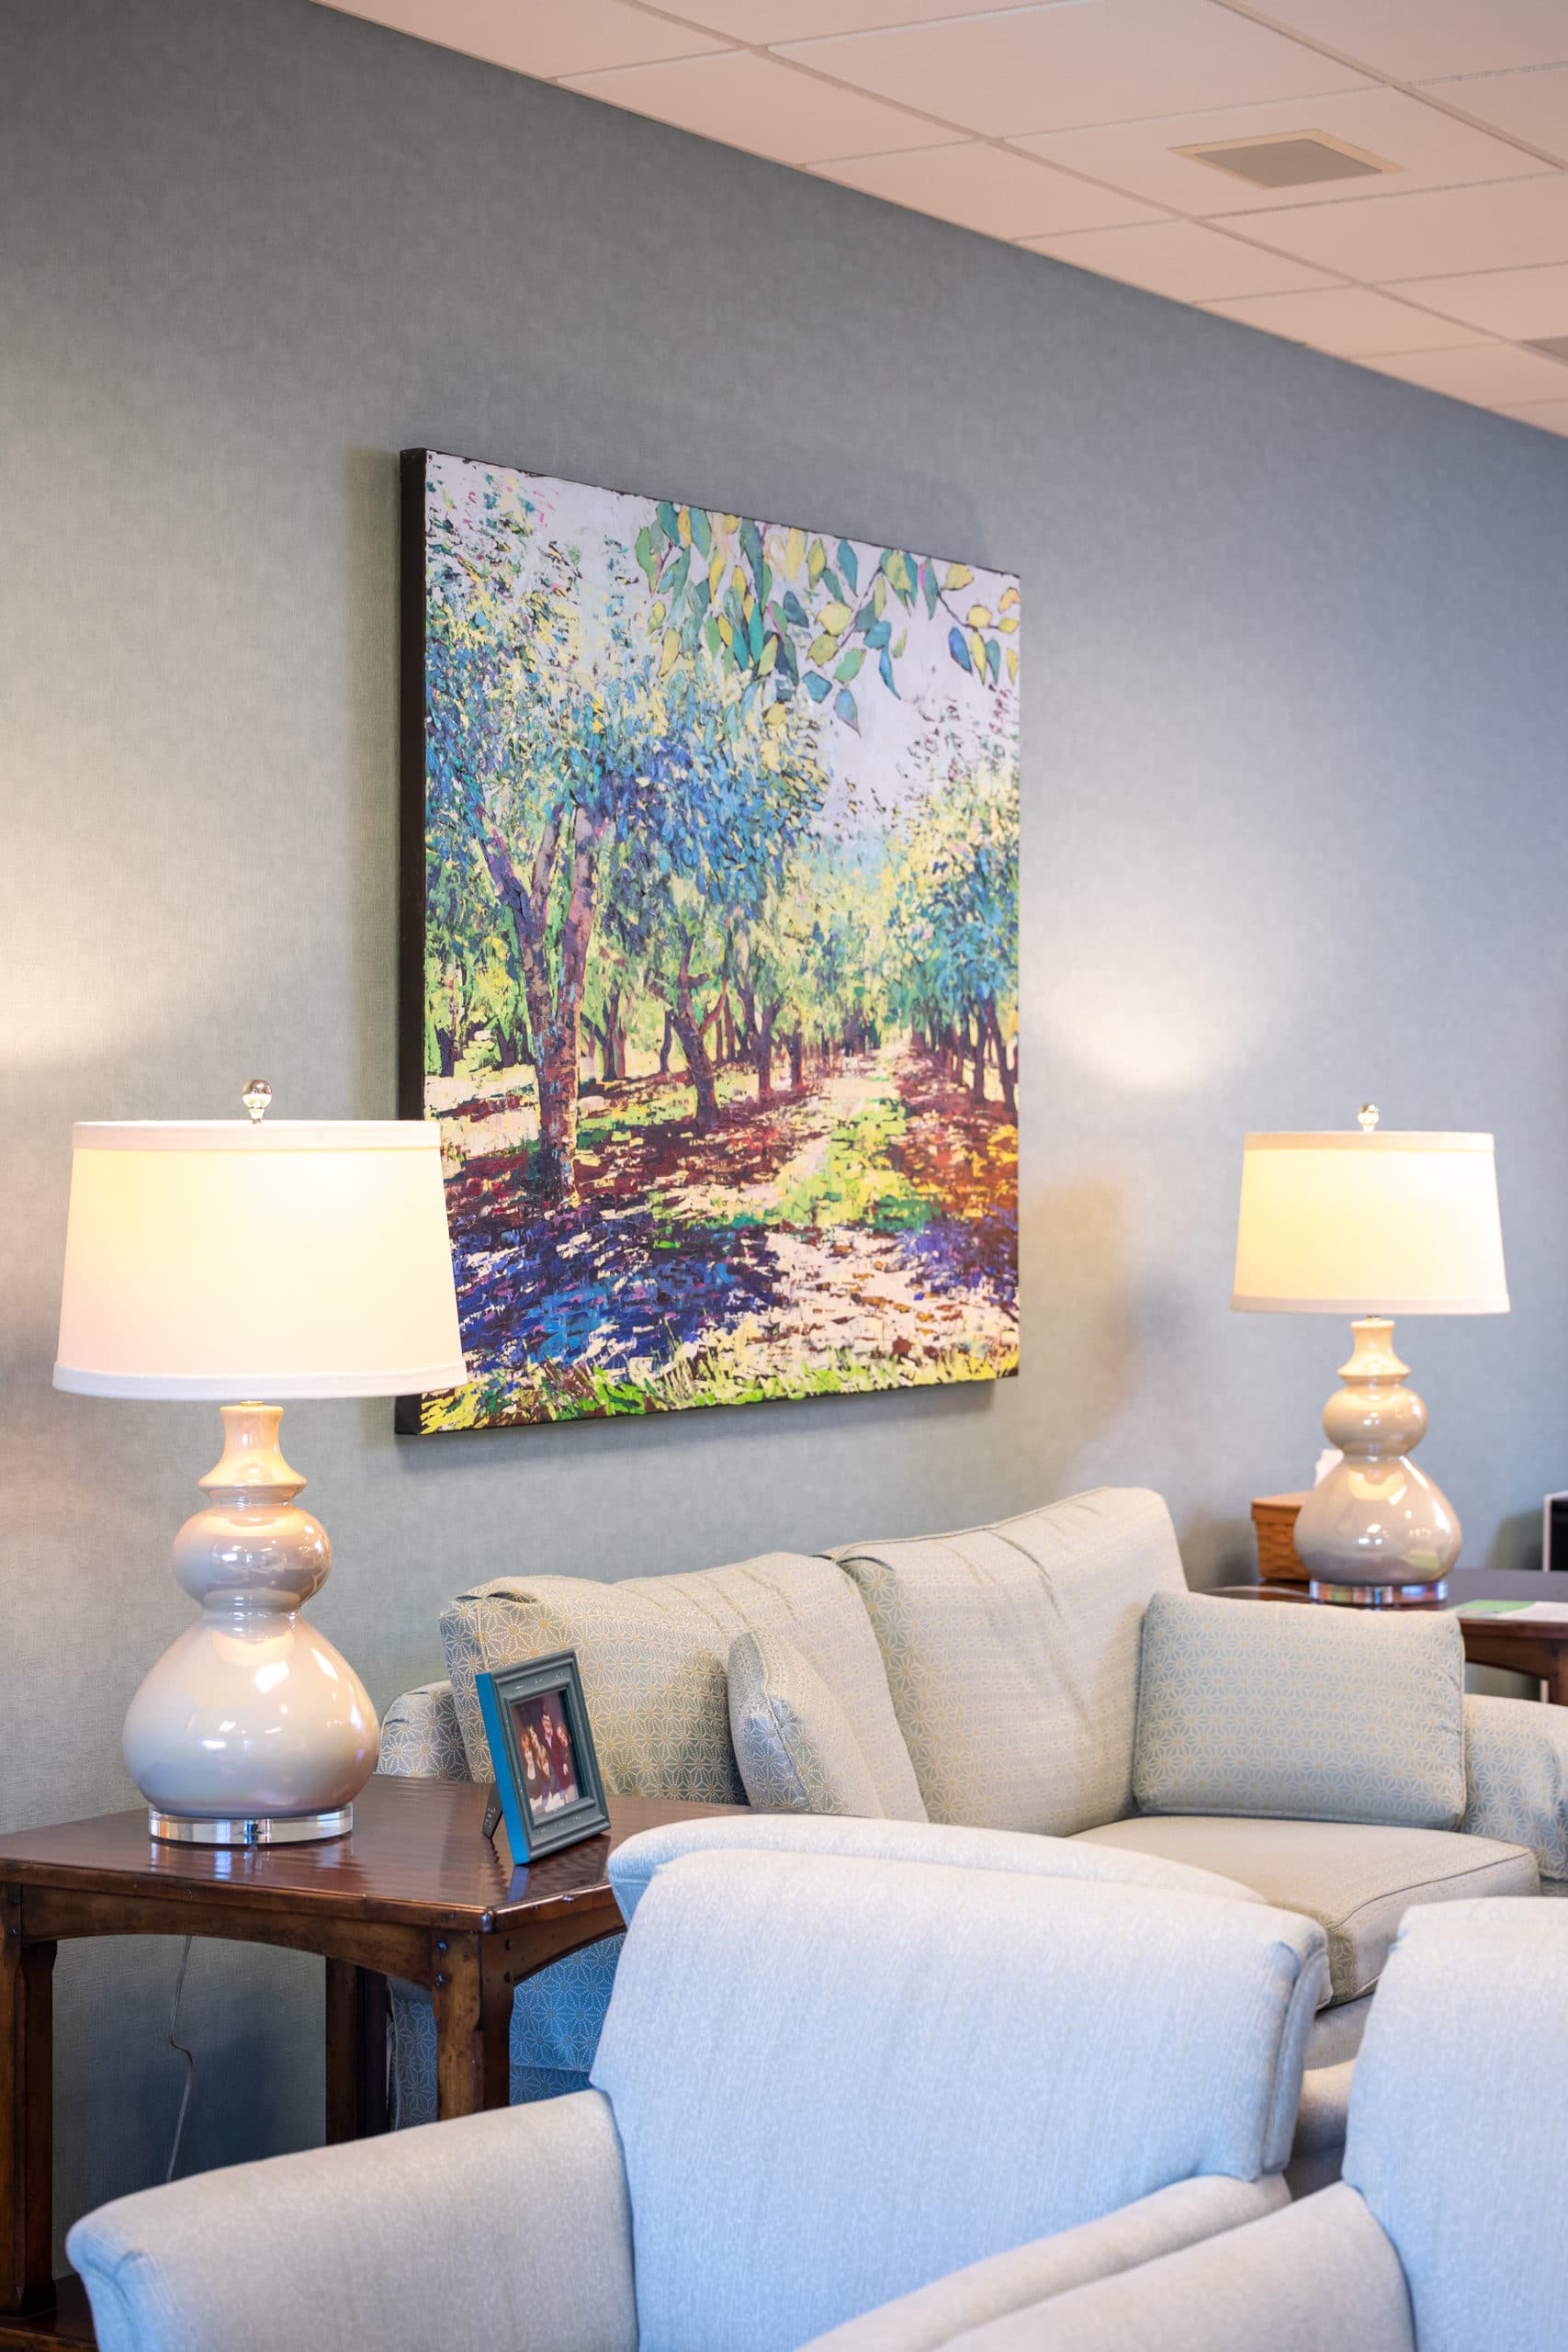 A picture of a couch and painting of trees in our waiting area.